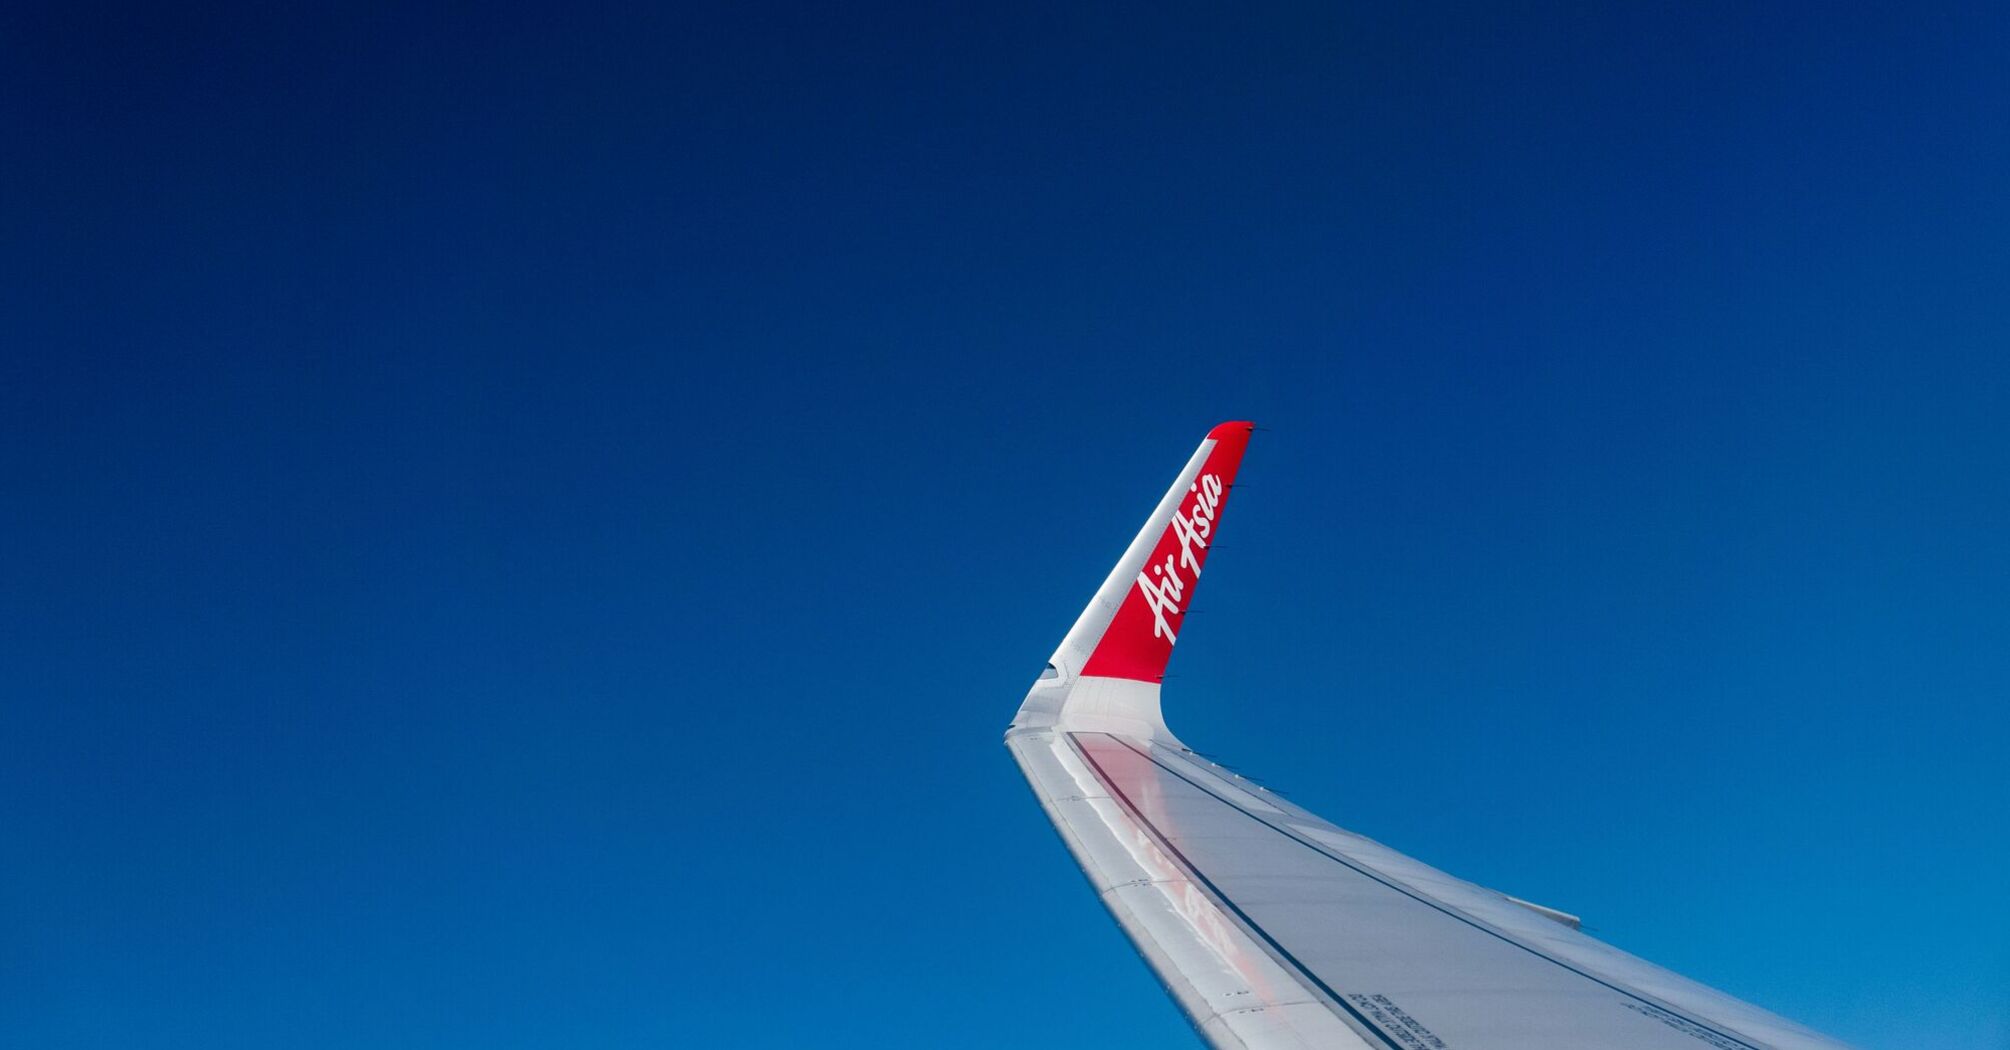 Wingtip of an AirAsia airplane with logo against a clear blue sky